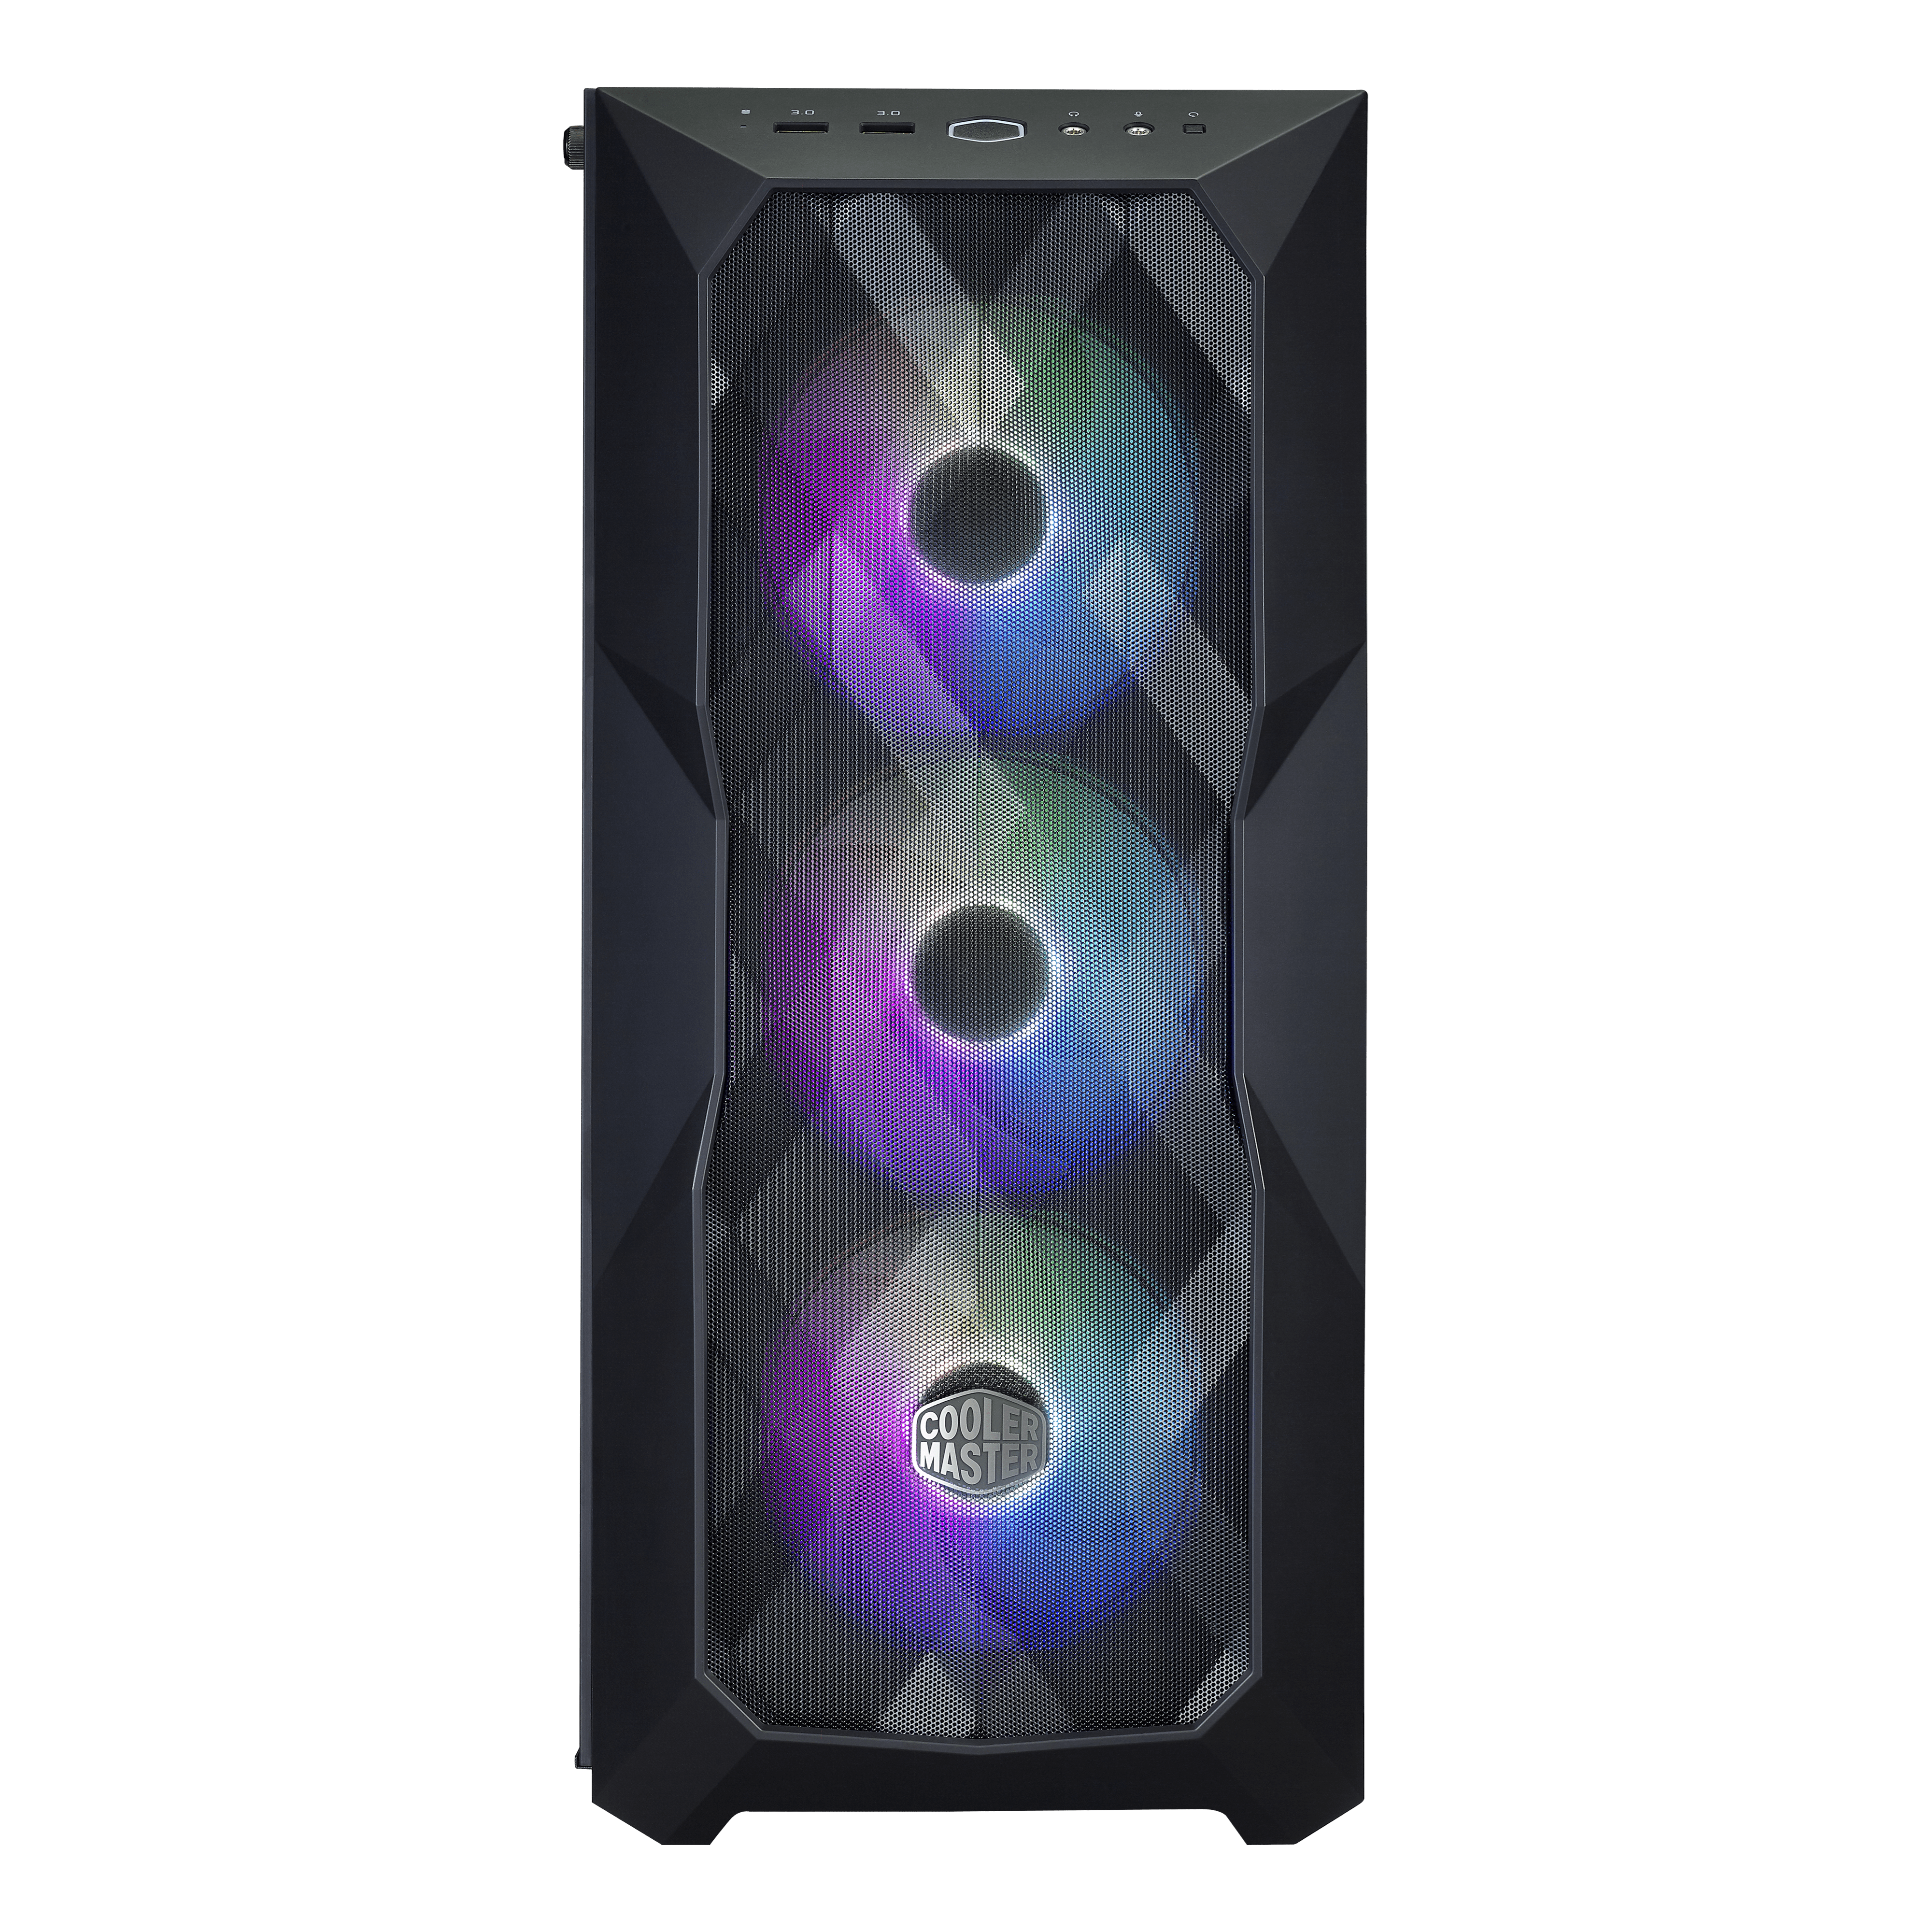 Cooler Master MasterBox TD500 Mesh Airflow ATX Mid-Tower with Polygonal  Mesh Front Panel,and Crystalline Tempered Glass - Black MCB-D500D-KGNN-S01